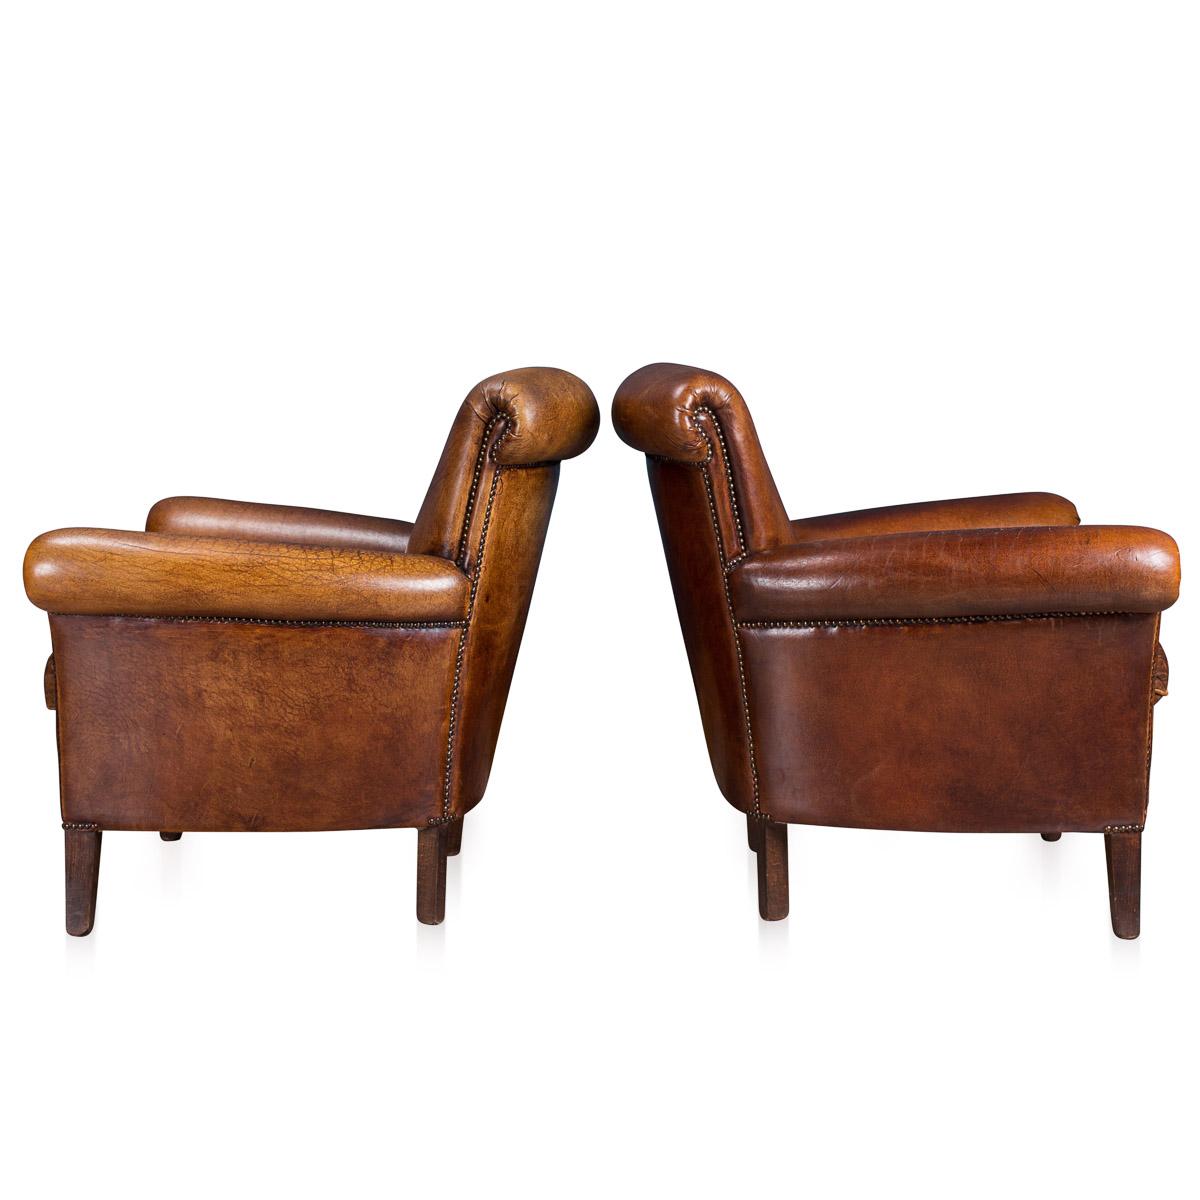 Showing superb patina and color, this wonderful pair of club chairs were hand upholstered sheepskin leather in Holland by the finest craftsmen. Fantastic look for any interior, both modern and traditional.
 
Condition:

In excellent condition -